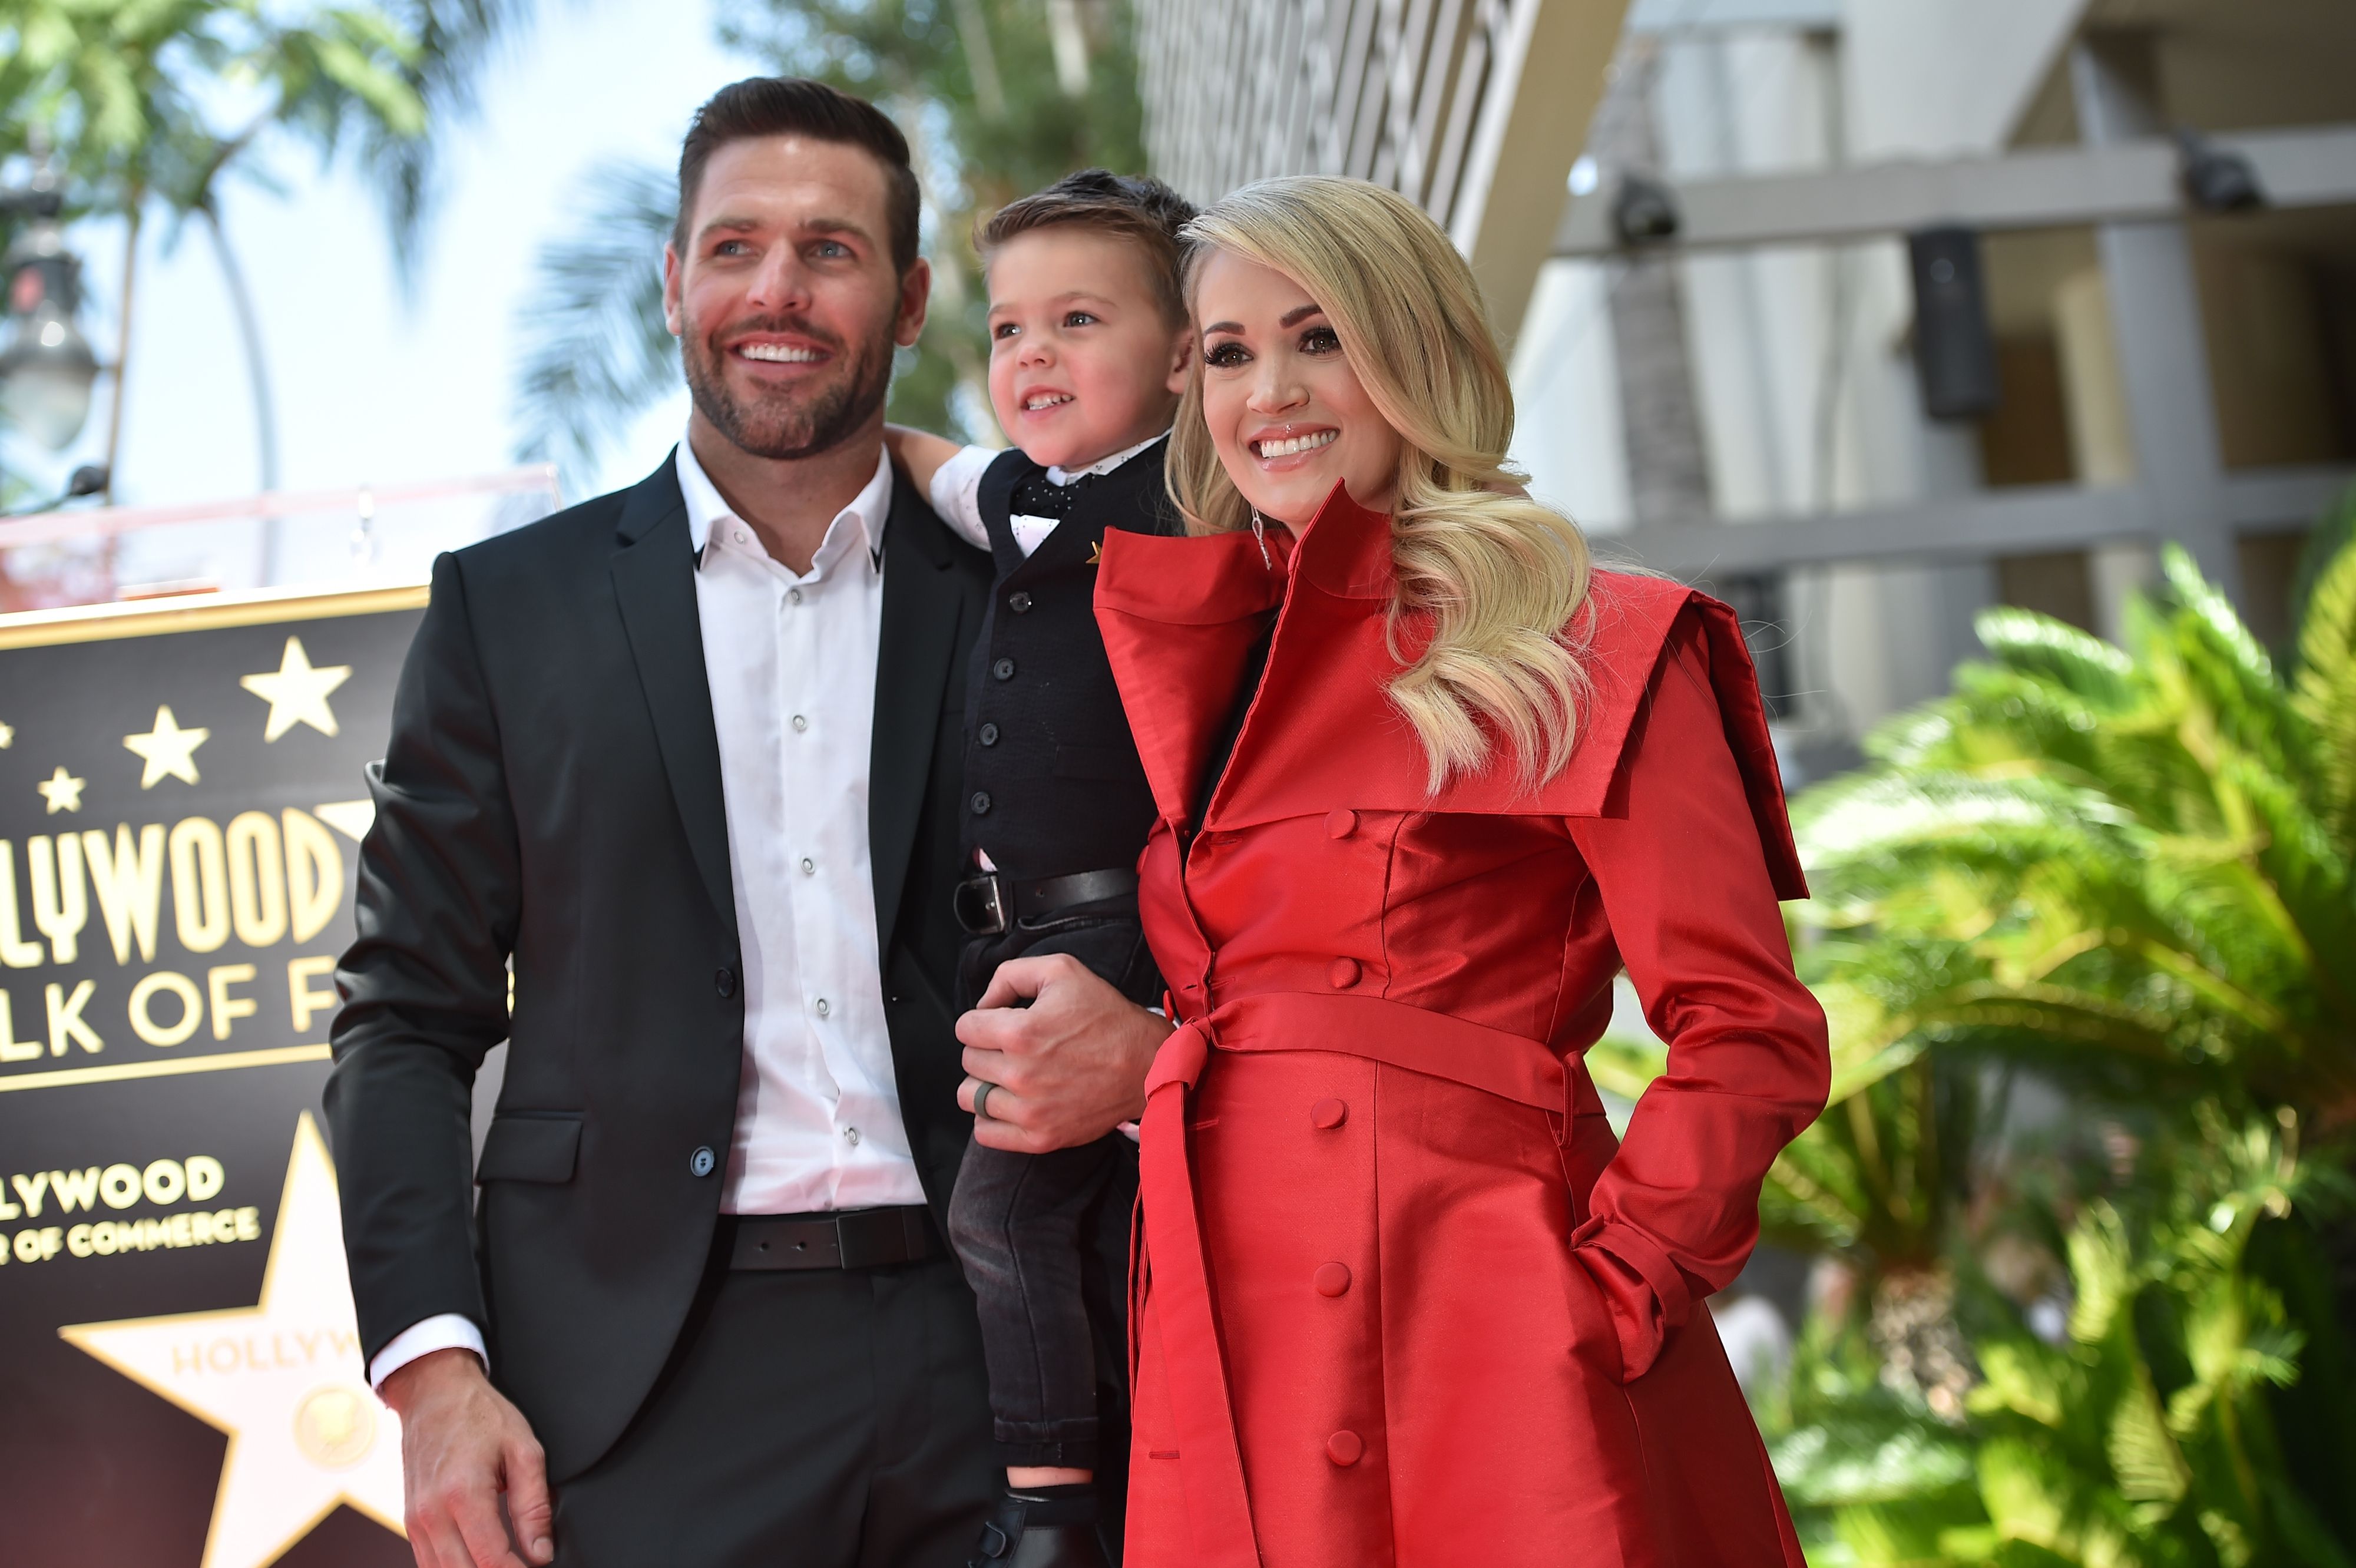 Carrie Underwood with her husband Mike Fisher and their son Isaiah in Hollywood in 2018 | Source: Getty Images